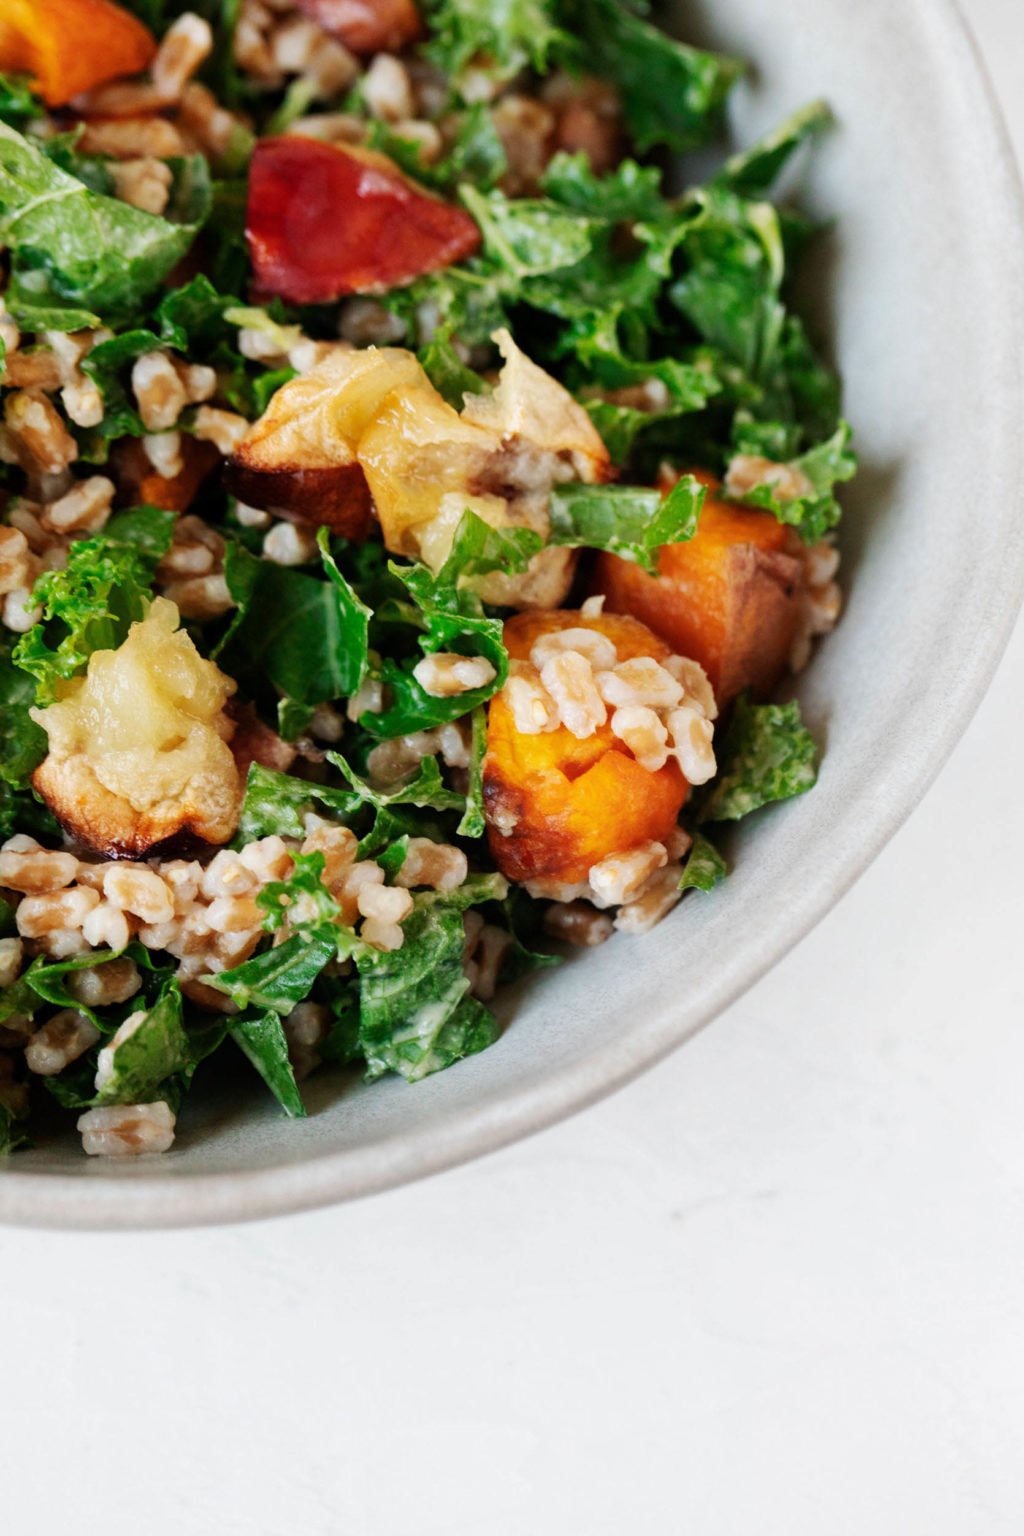 An overhead image of roasted apples and root vegetables, farro, kale, and a creamy dressing.